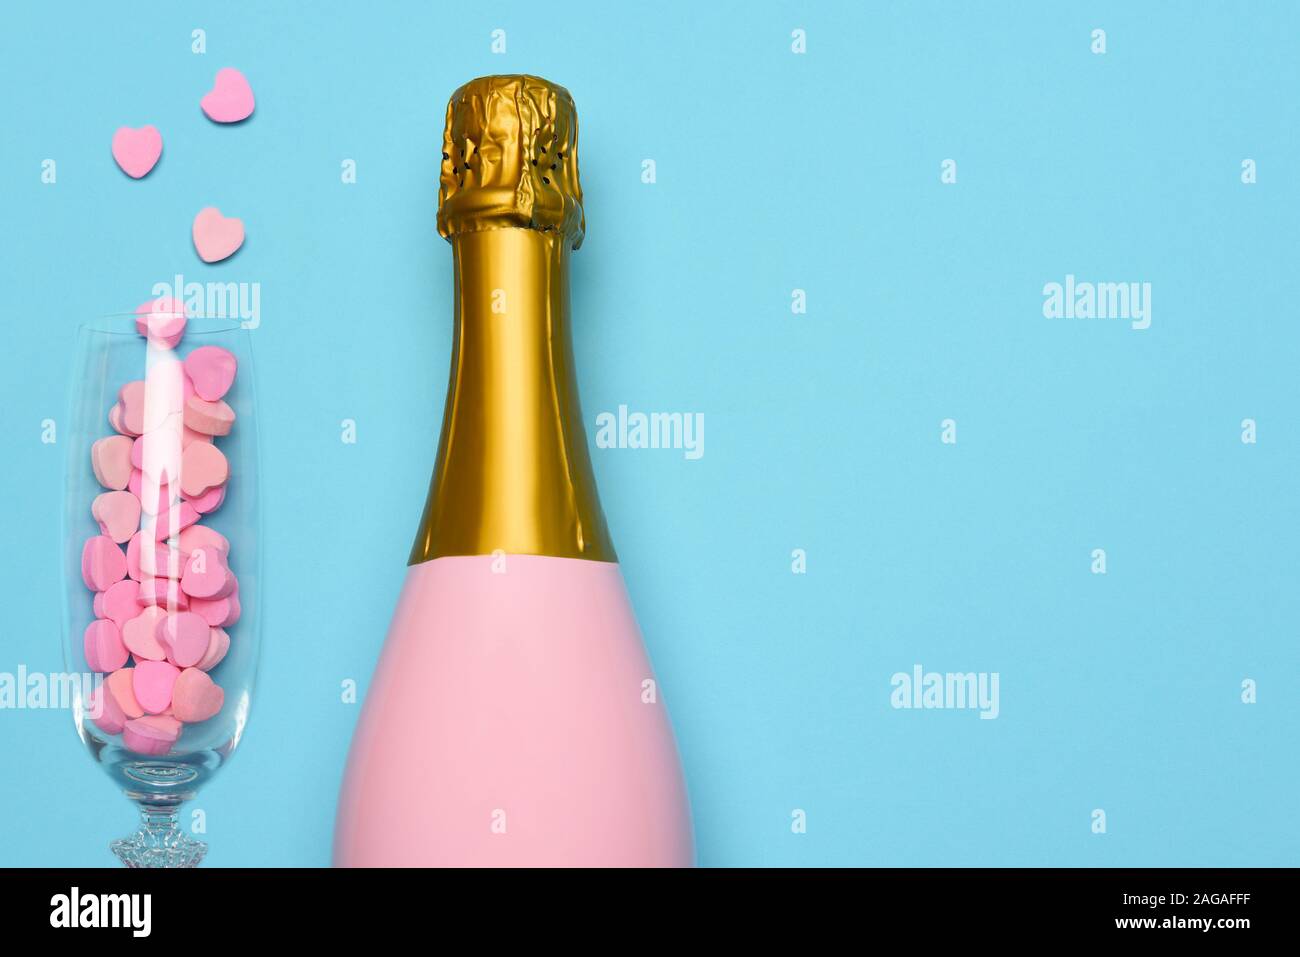 A Pink Champagne bottle and a flute with candy hearts on a blue teal background. Horizontal high angle shot with copy space. Stock Photo